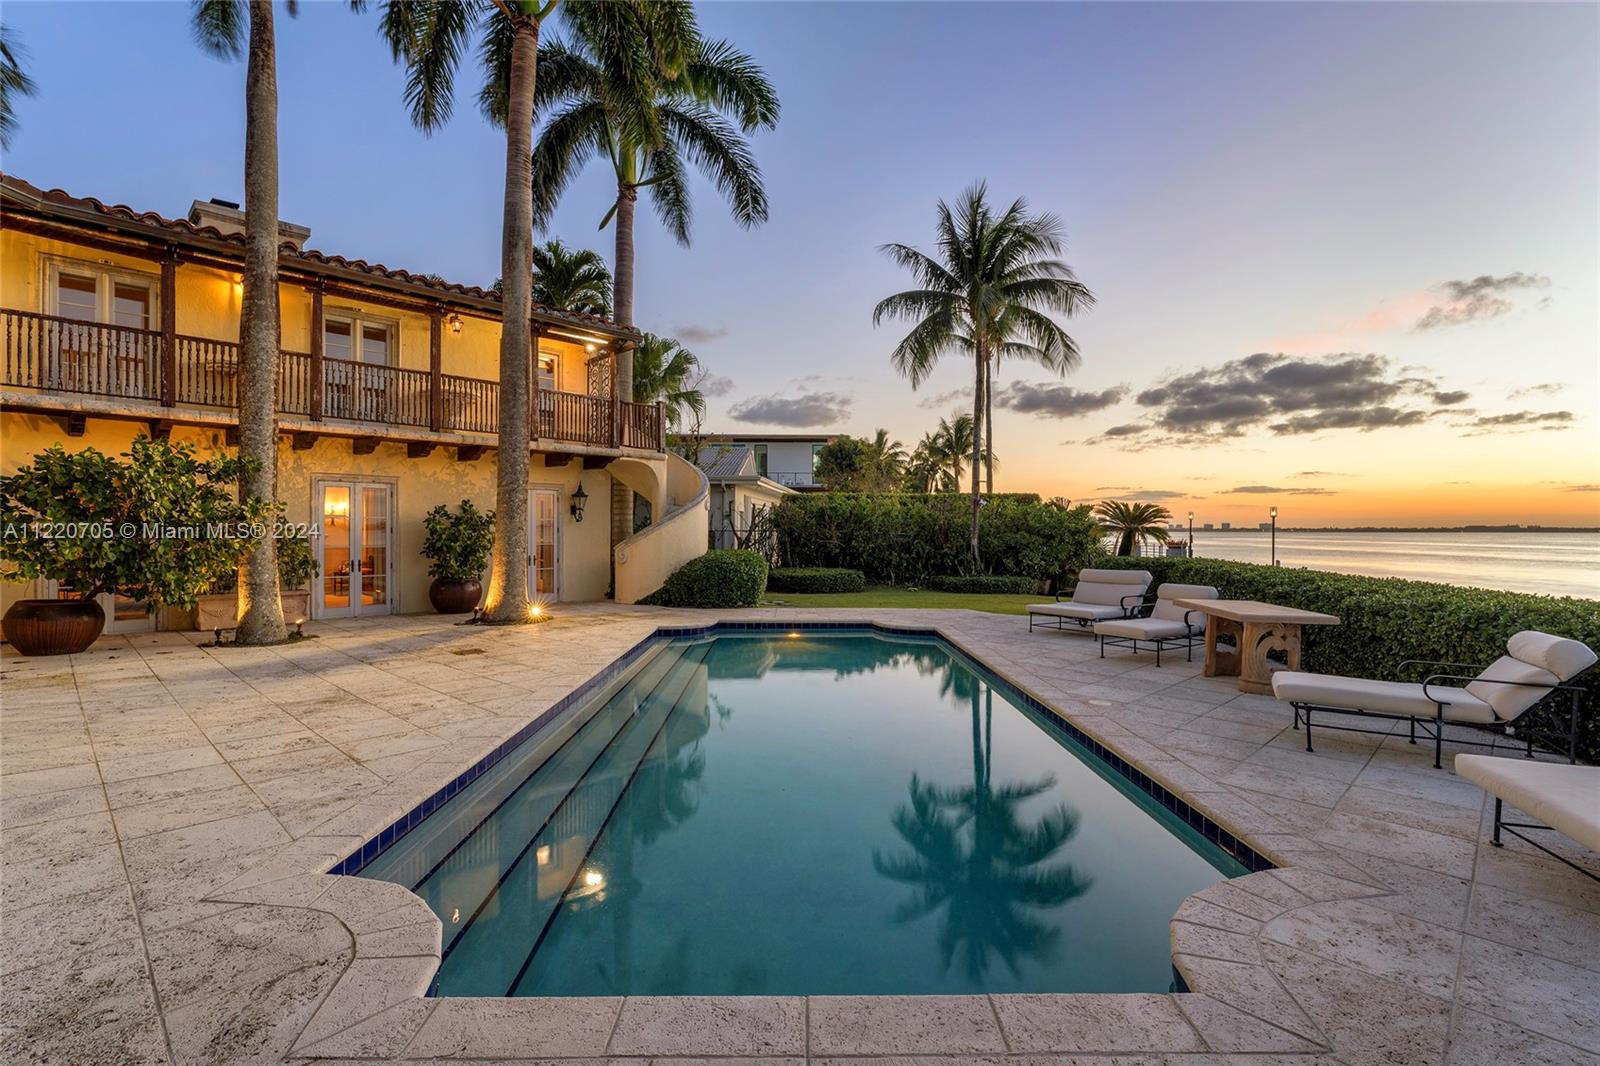 Located on prestigious North Bay Road this 2-story Mediterranean waterfront home sits on a private 20,100 SF point corner lot in a cul-de-sac with open Biscayne Bay and Miami skyline views plus 230’+ of sparkling water frontage wrapping around to protected waterfront with a private dock. Features 5BR/5BA, a gated security entrance, Chicago brick driveway, and a  serene interior courtyard with fountain. Outdoor highlights include mature lush, landscaped grounds and gardens, a large pool with natural coral deck, covered seating area with alfresco table, second story balcony with views to bay. Location , Views , land , Water frontage!!